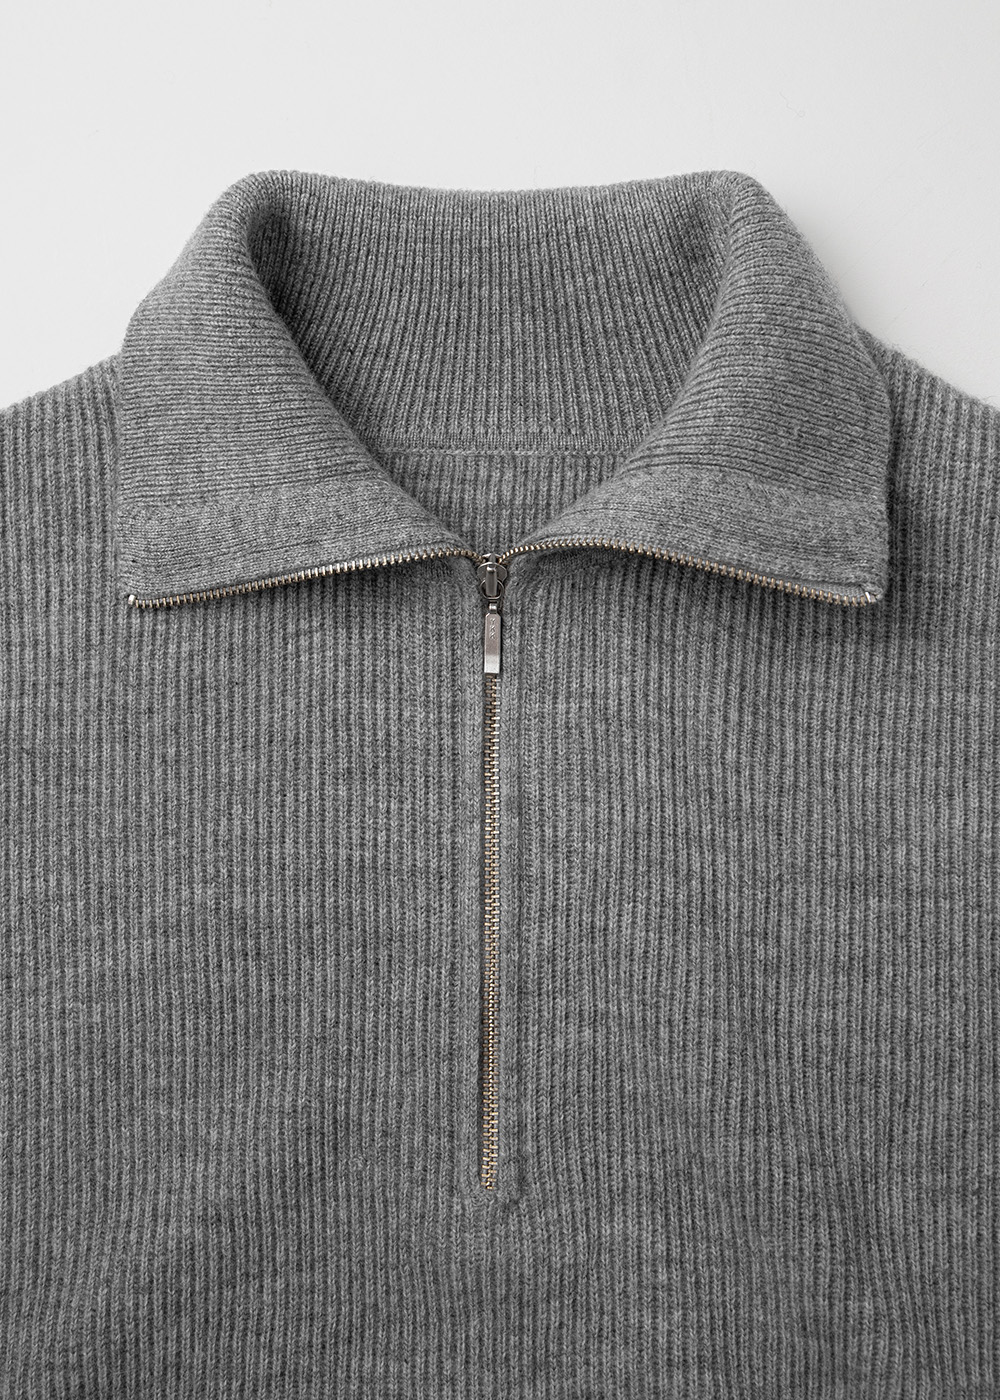 Cashmere 10% Blended Half Zip Pullover Cardigan _ gray